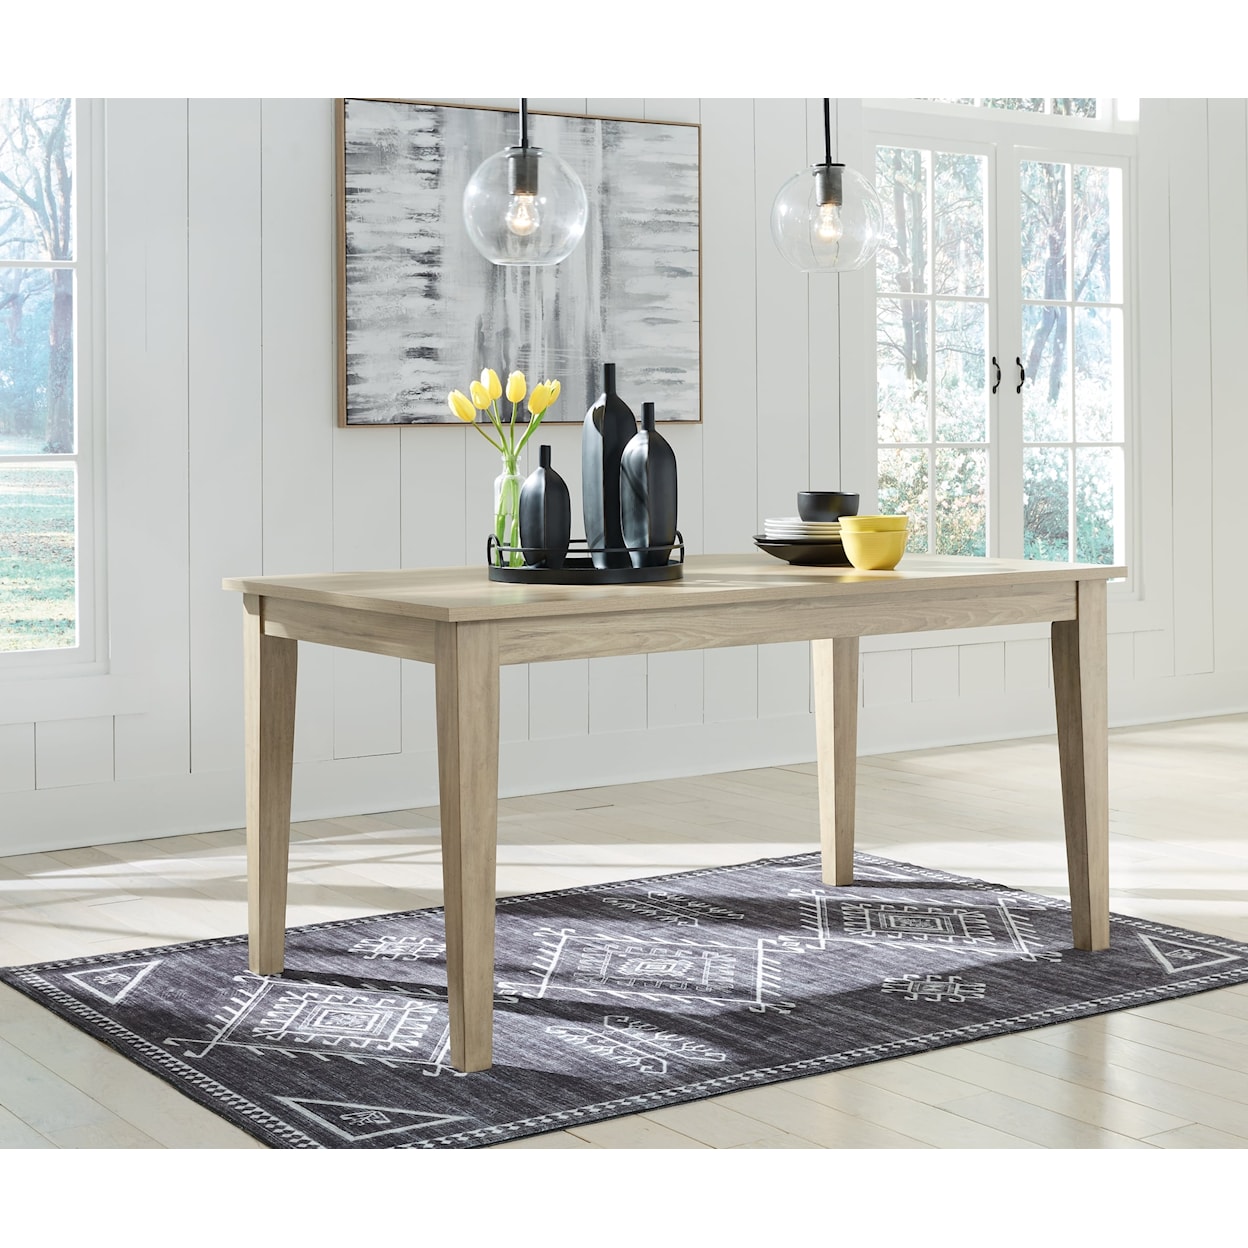 Signature Design by Ashley Gleanville 6-Piece Dining Set with Bench